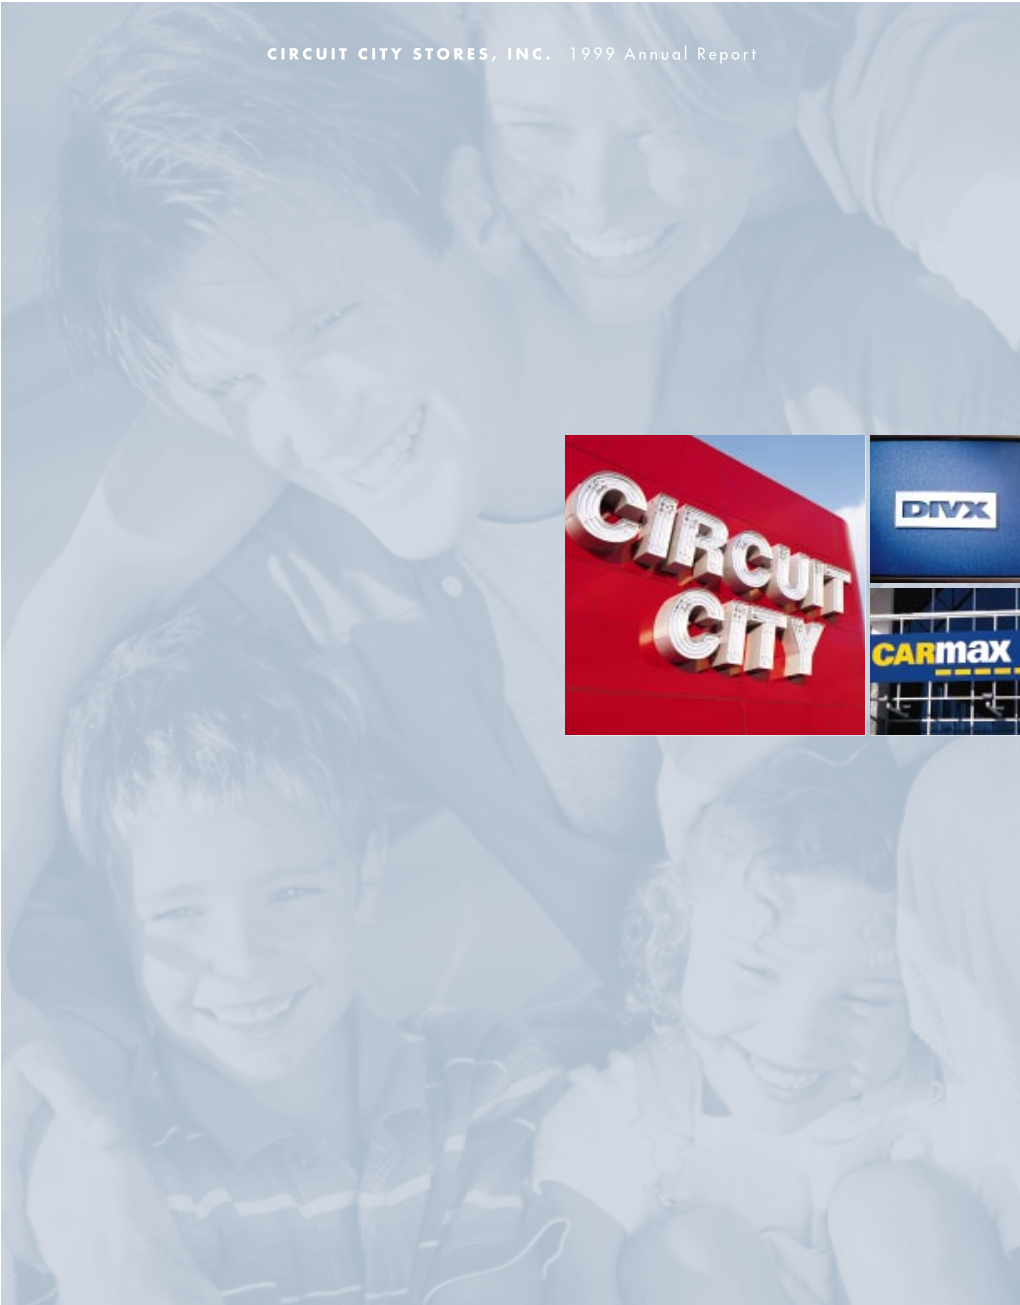 CIRCUIT CITY STORES, INC. 1999 Annual Report FINANCIAL HIGHLIGHTS